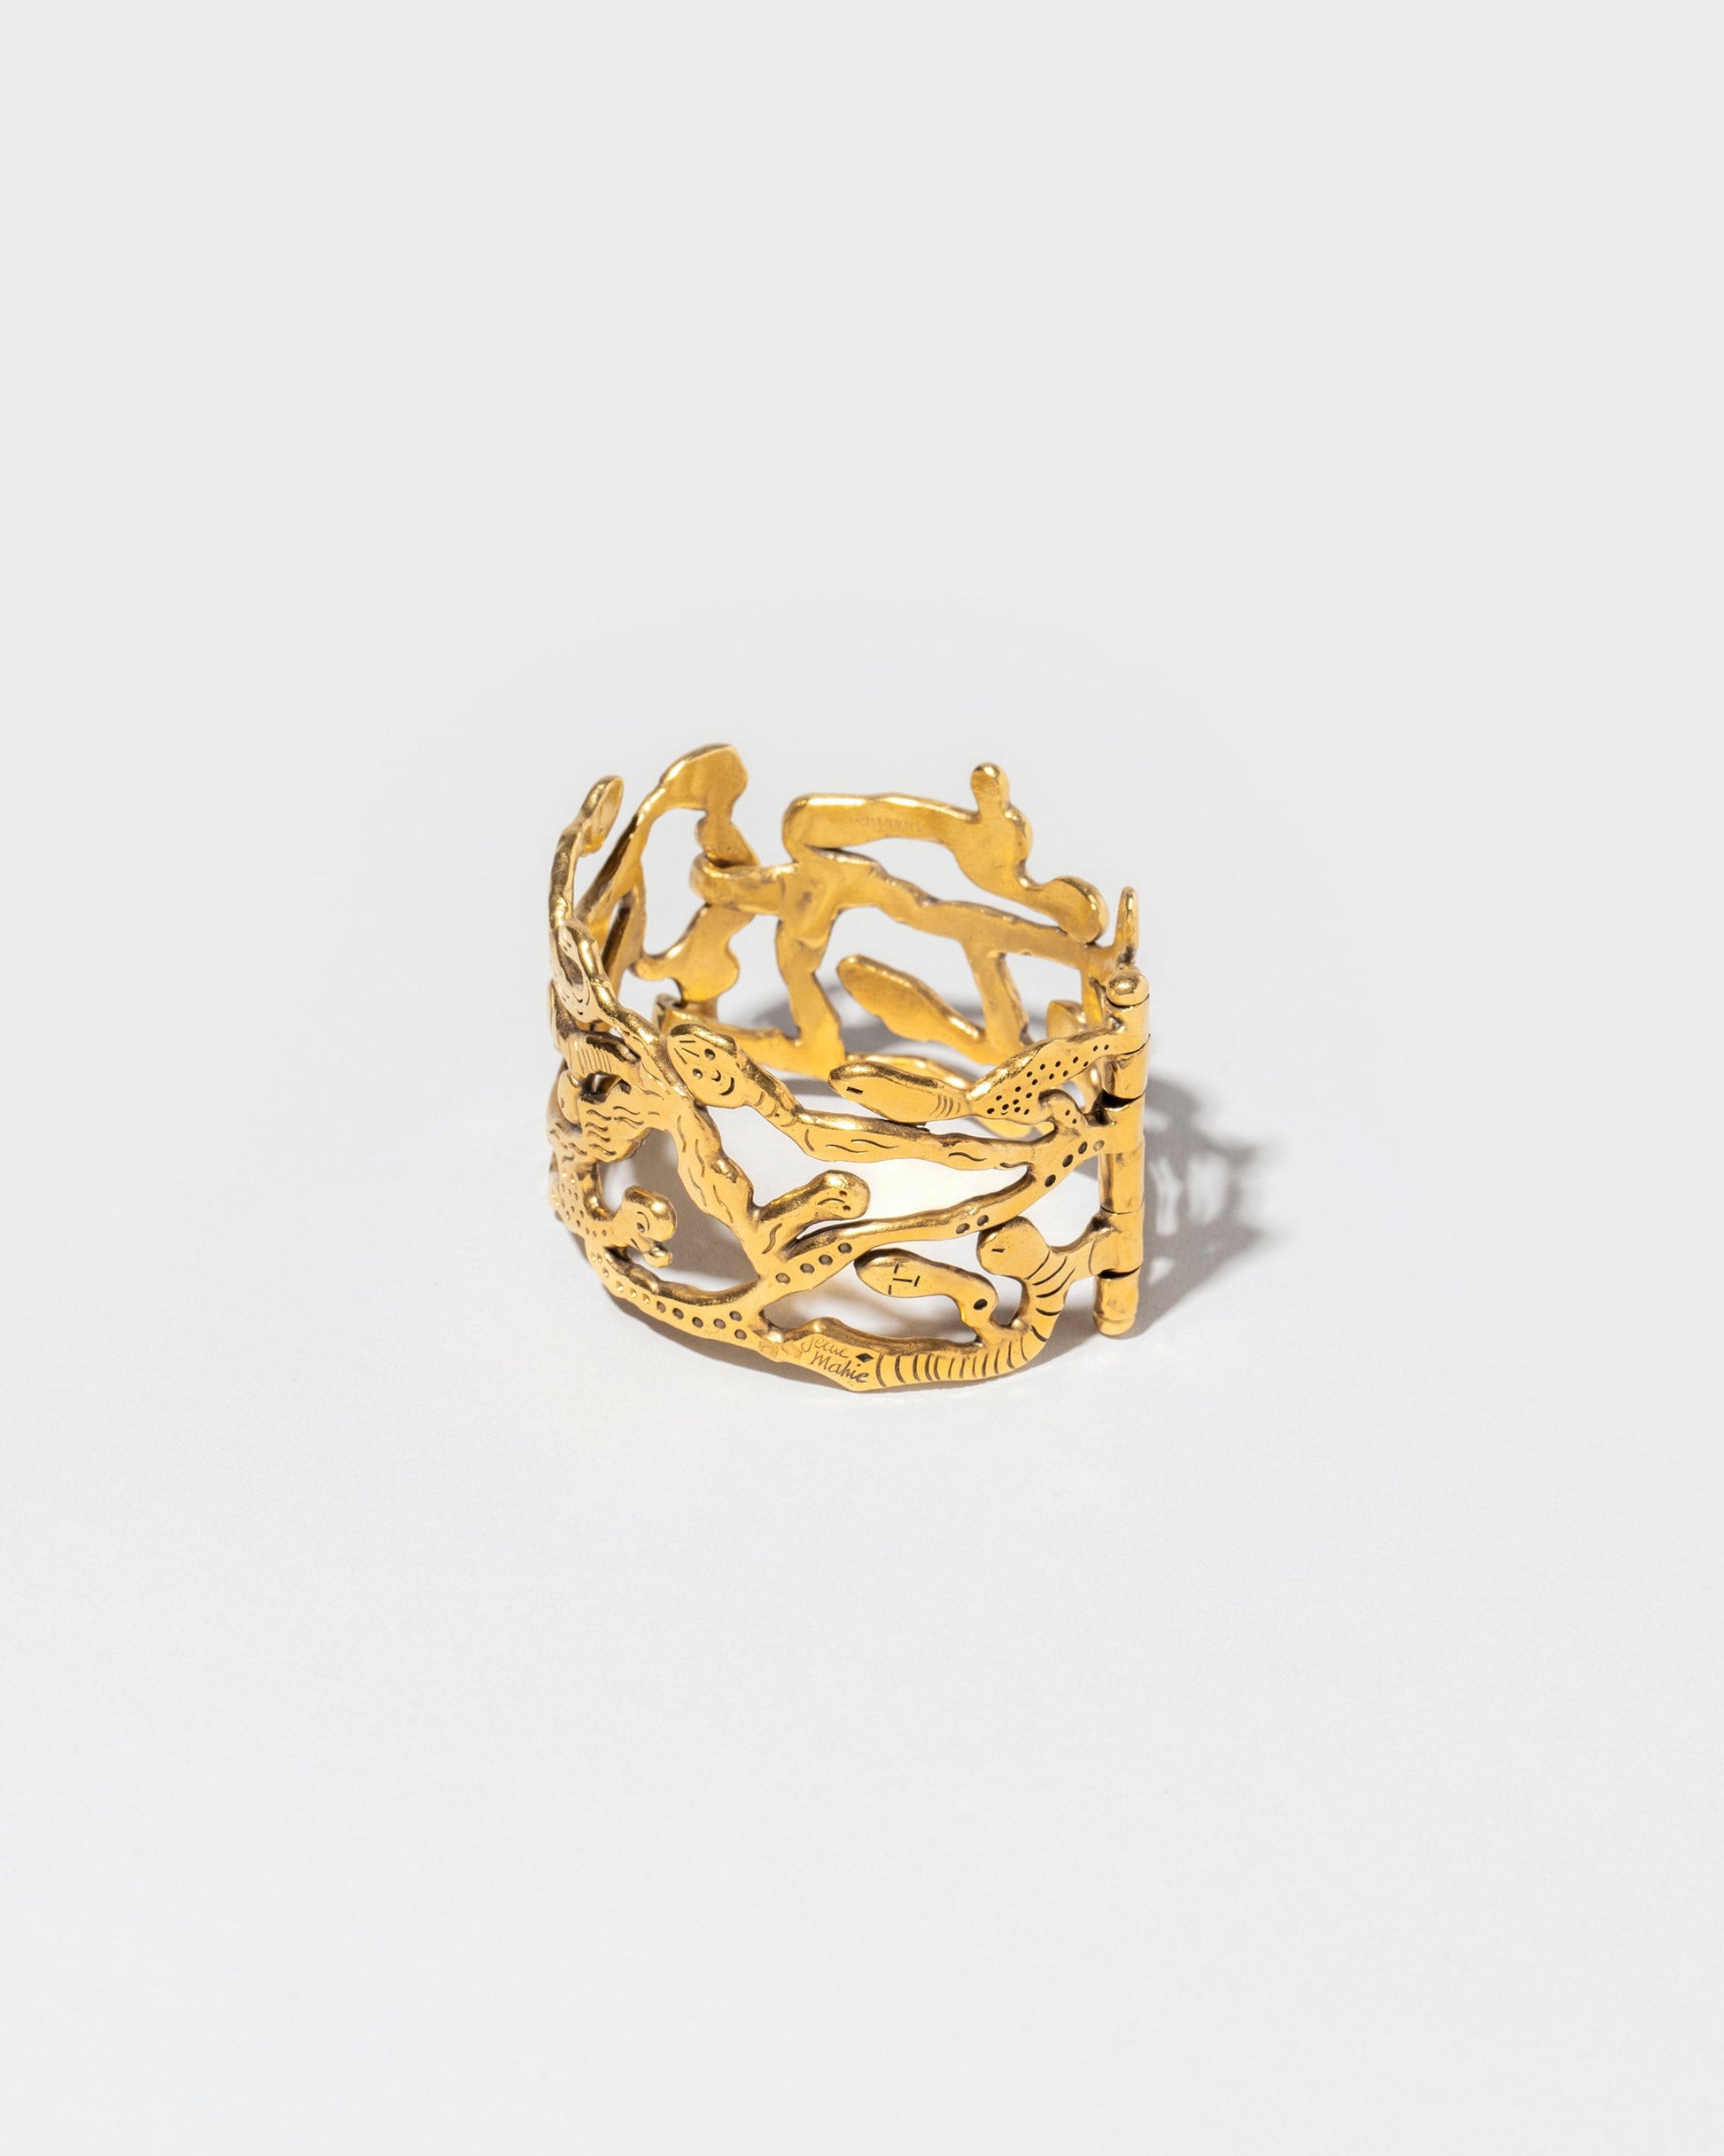  Jean Mahie Cuff on light color background.